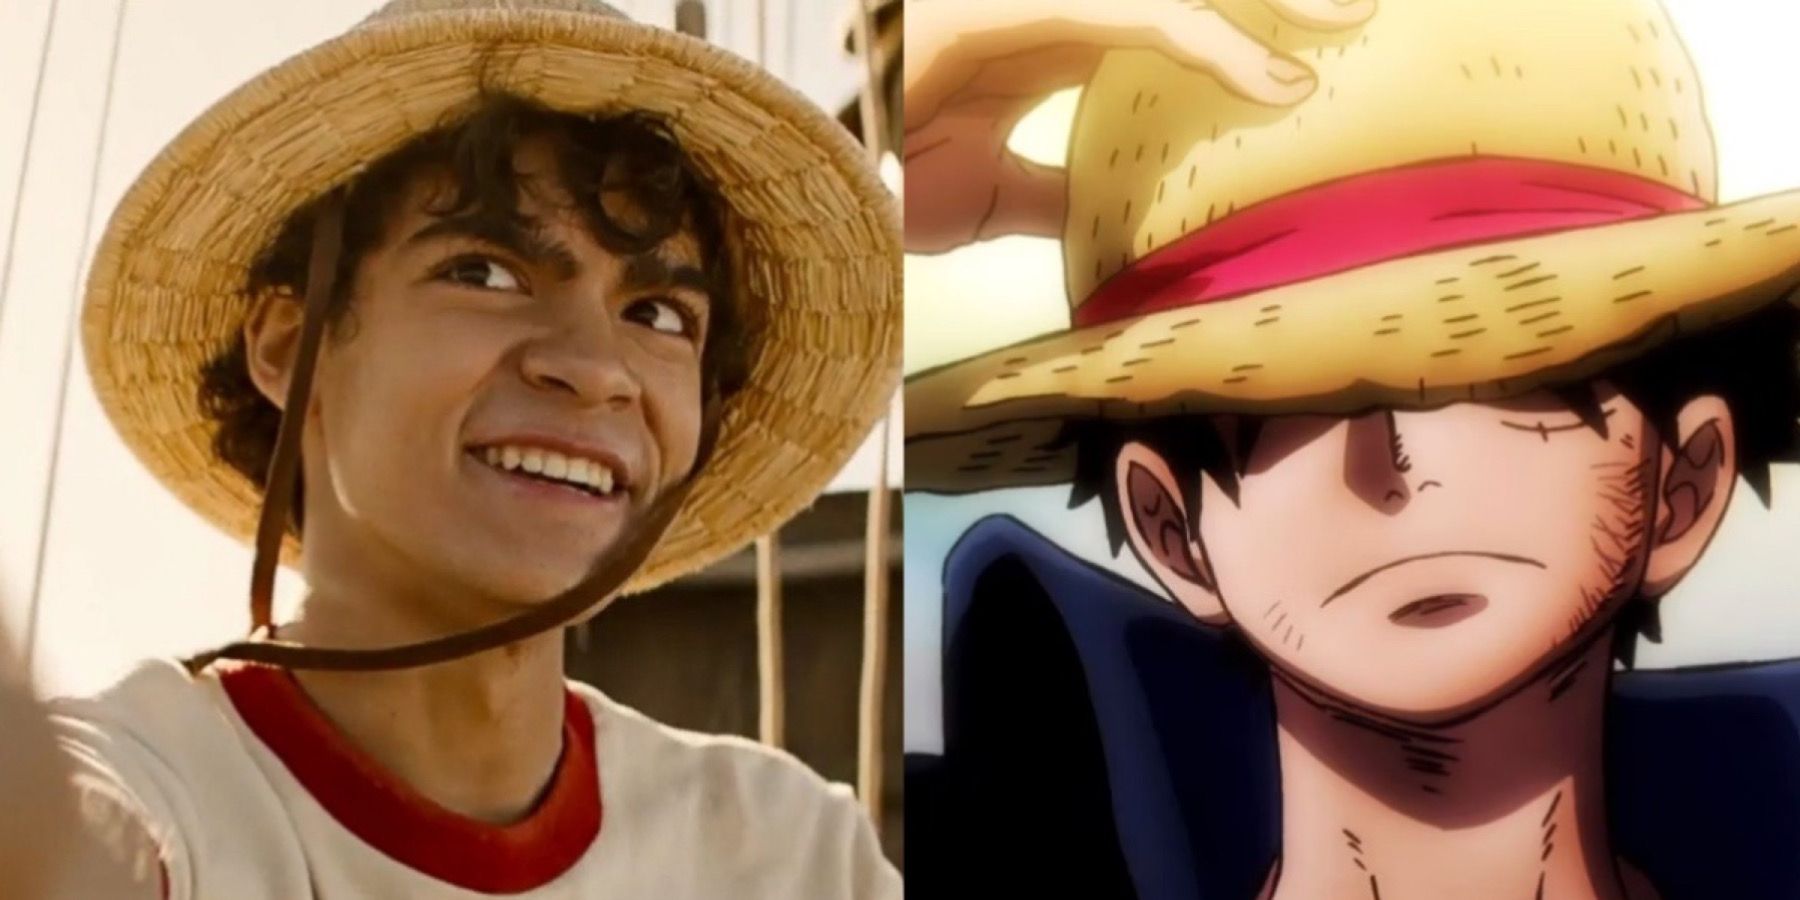 Monkey D Luffy What You Need to Know Before the Live Action